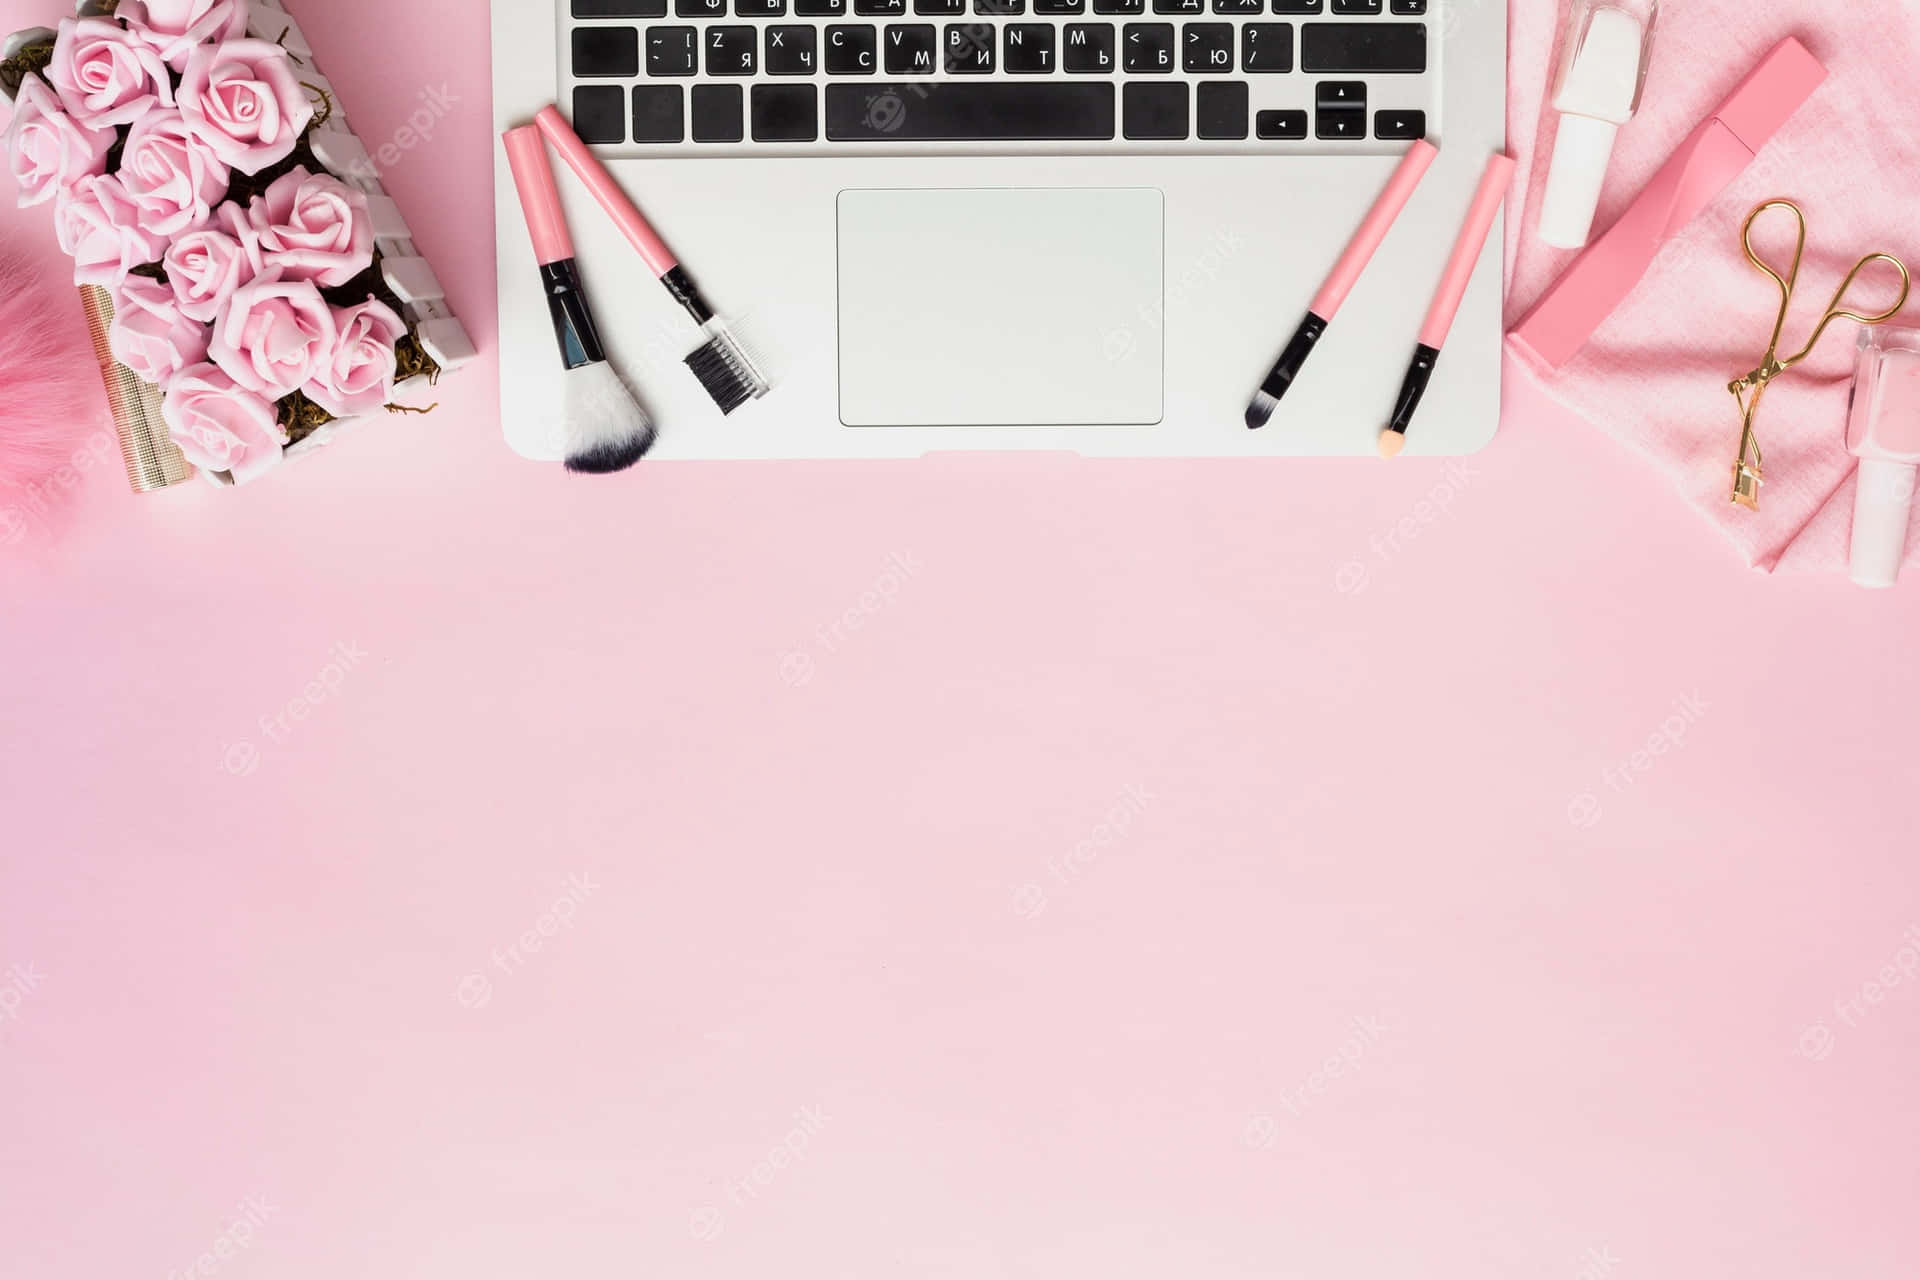 Pink Laptop, Makeup Brushes, Flowers And Cosmetics On A Pink Background Wallpaper